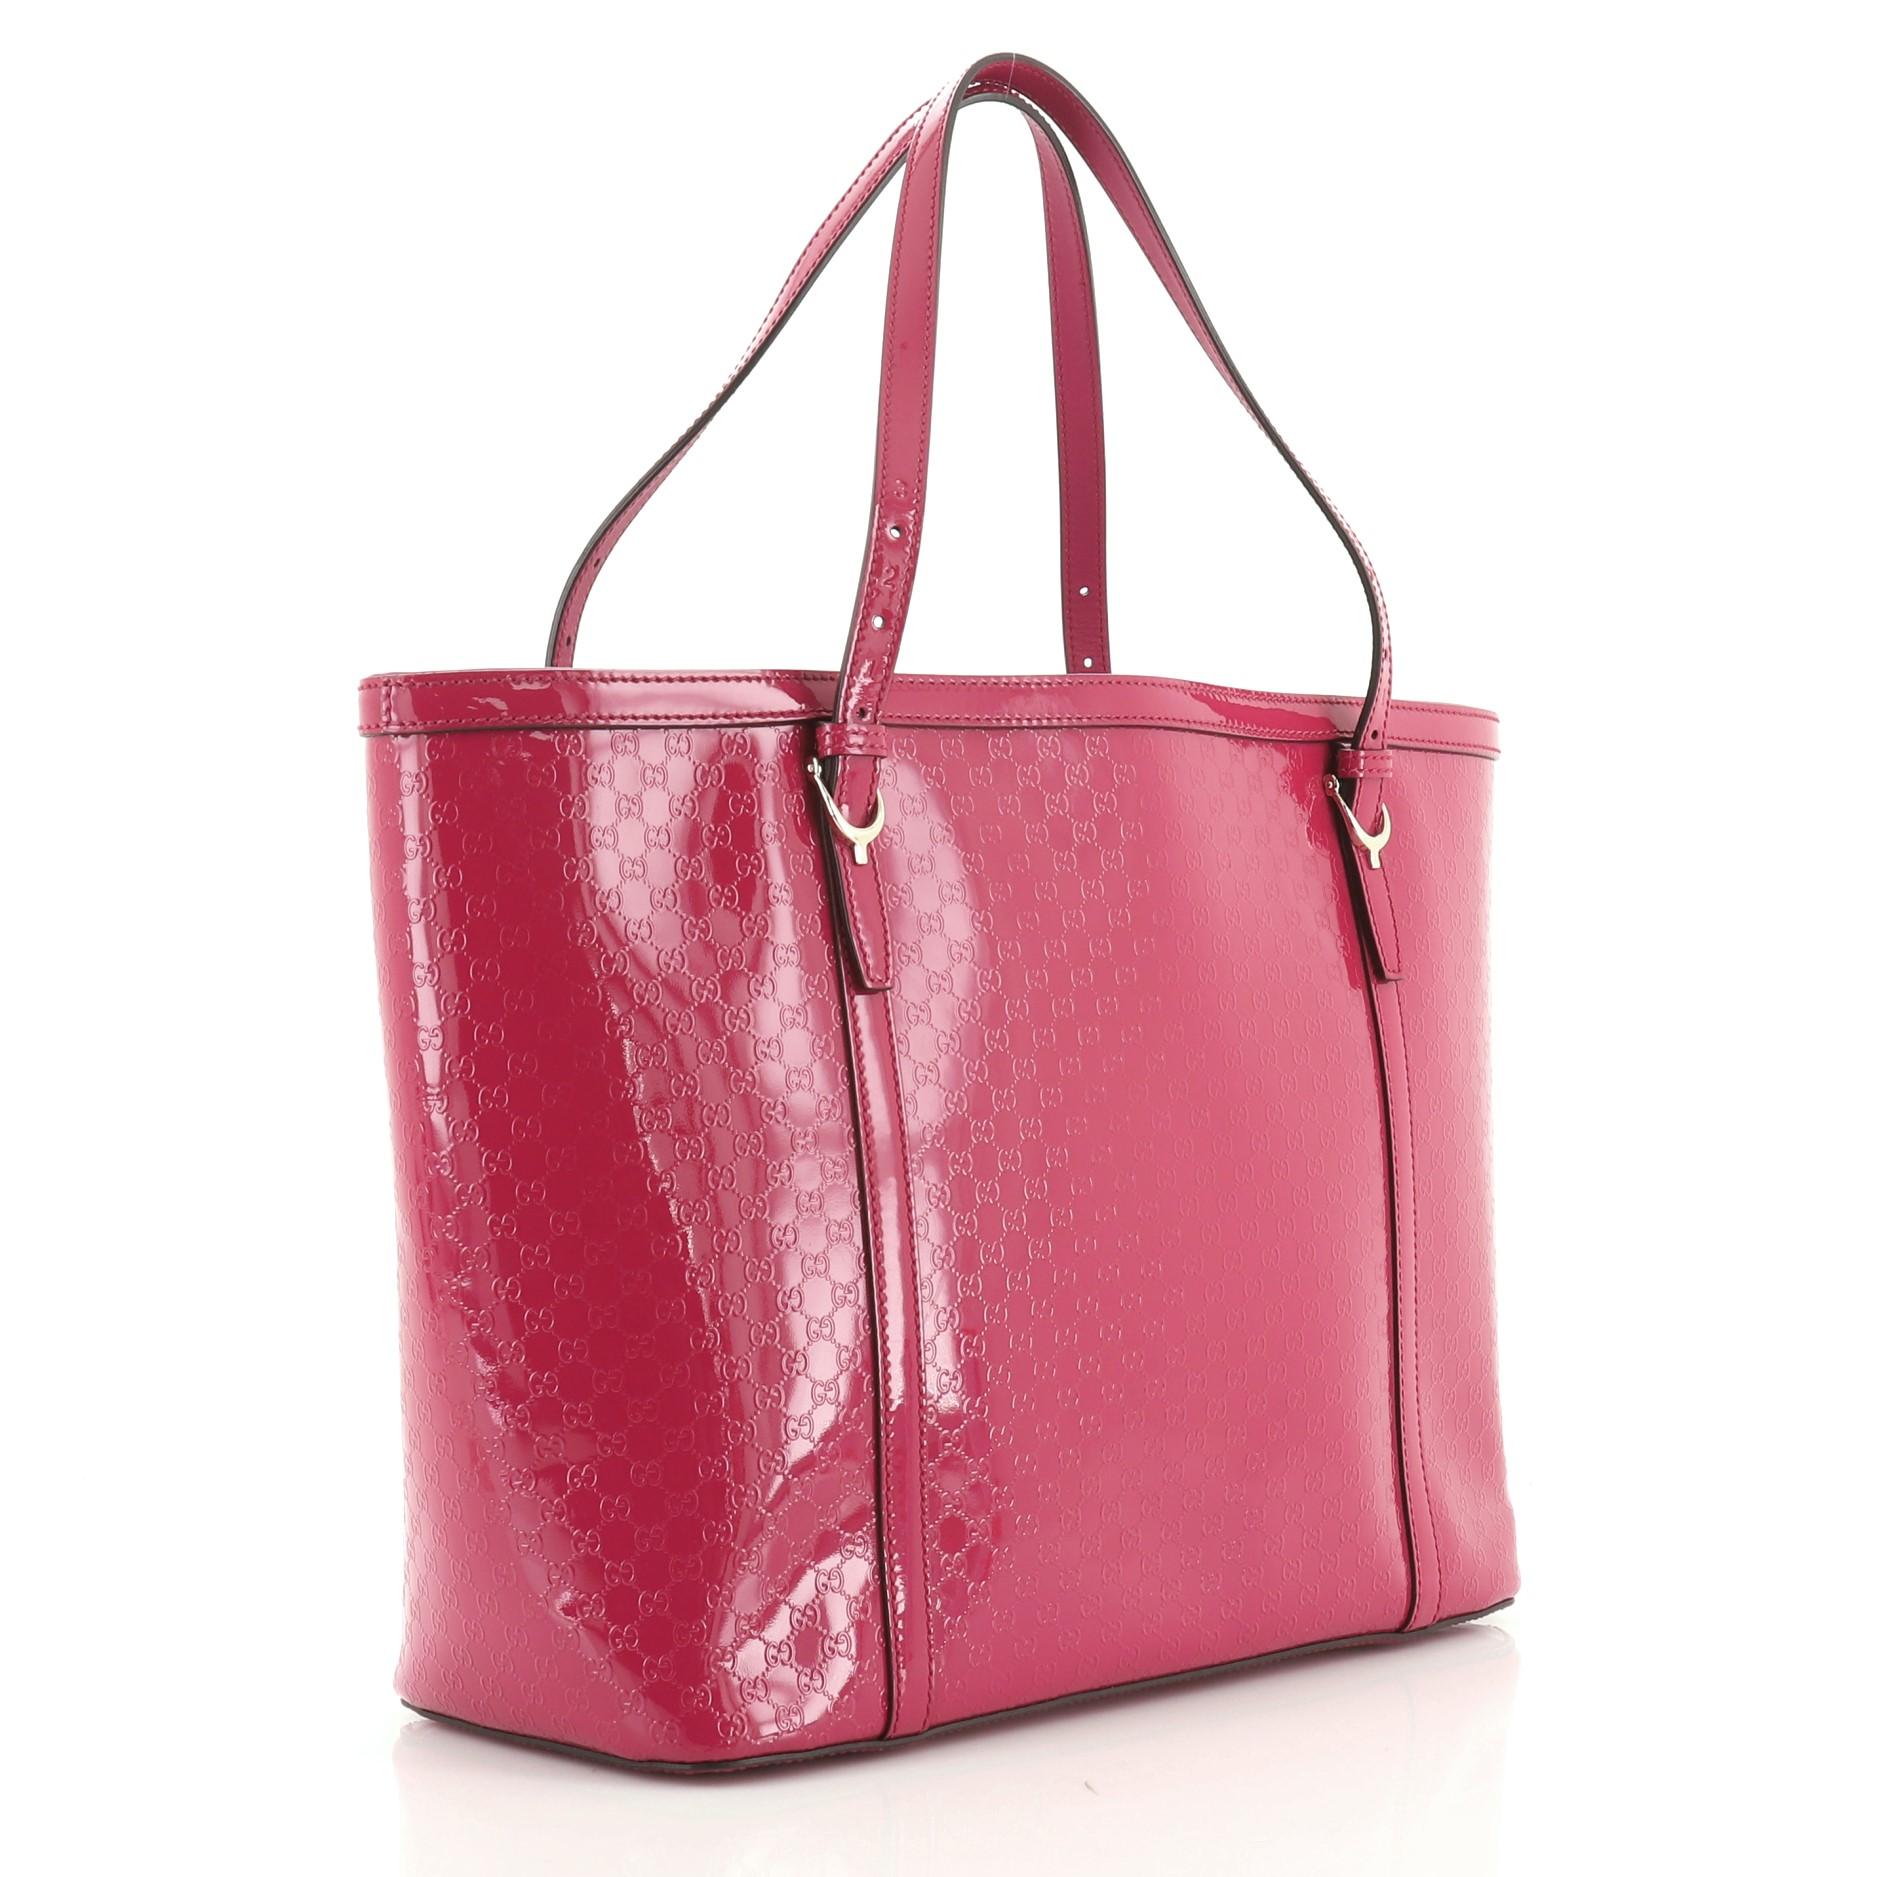 This Gucci Nice Tote Microguccissima Patent Medium, crafted in pink microguccissima patent leather, features dual adjustable flat handles, spur details, and gold-tone hardware. Its middle hook closure opens to a neutral fabric interior with zip and